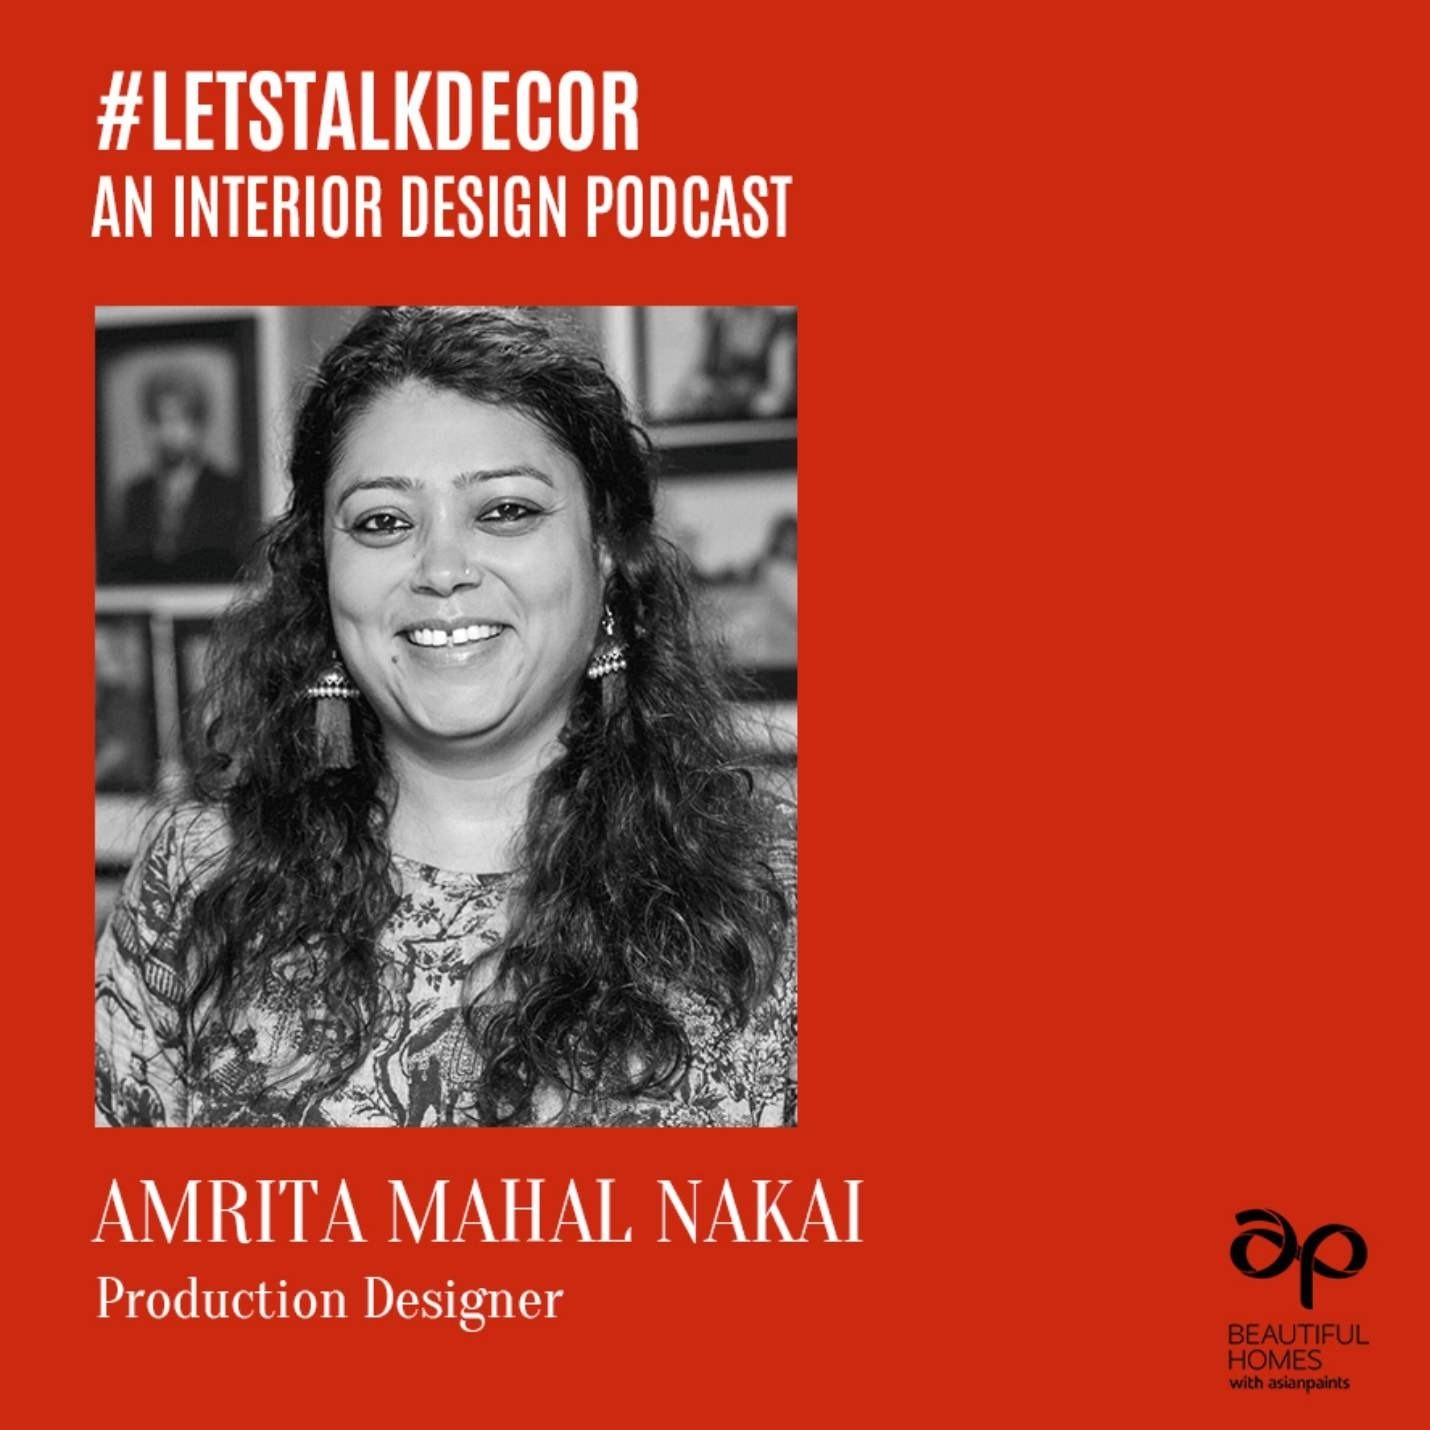 Production Designer Amrita Mahal on using your personality as the starting point for your mood board